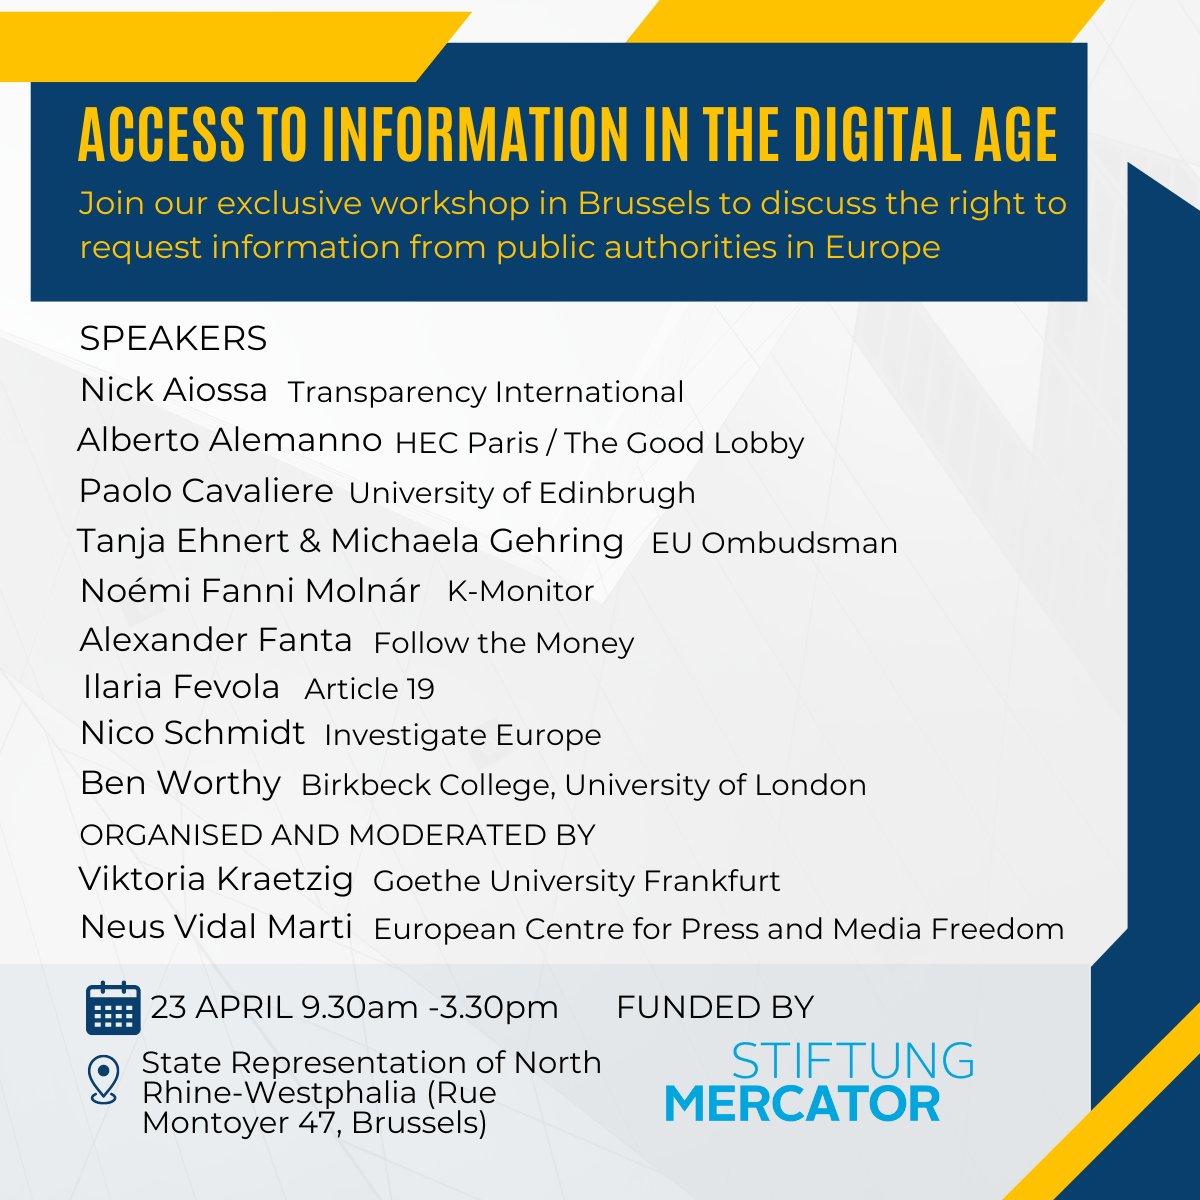 Looking forward to joining a tremendous line up of speakers in Brussels on 23 April to speak about the much needed advancement of the right to information in Europe. Thanks @neusvidal @ECPMF  for the invitation!